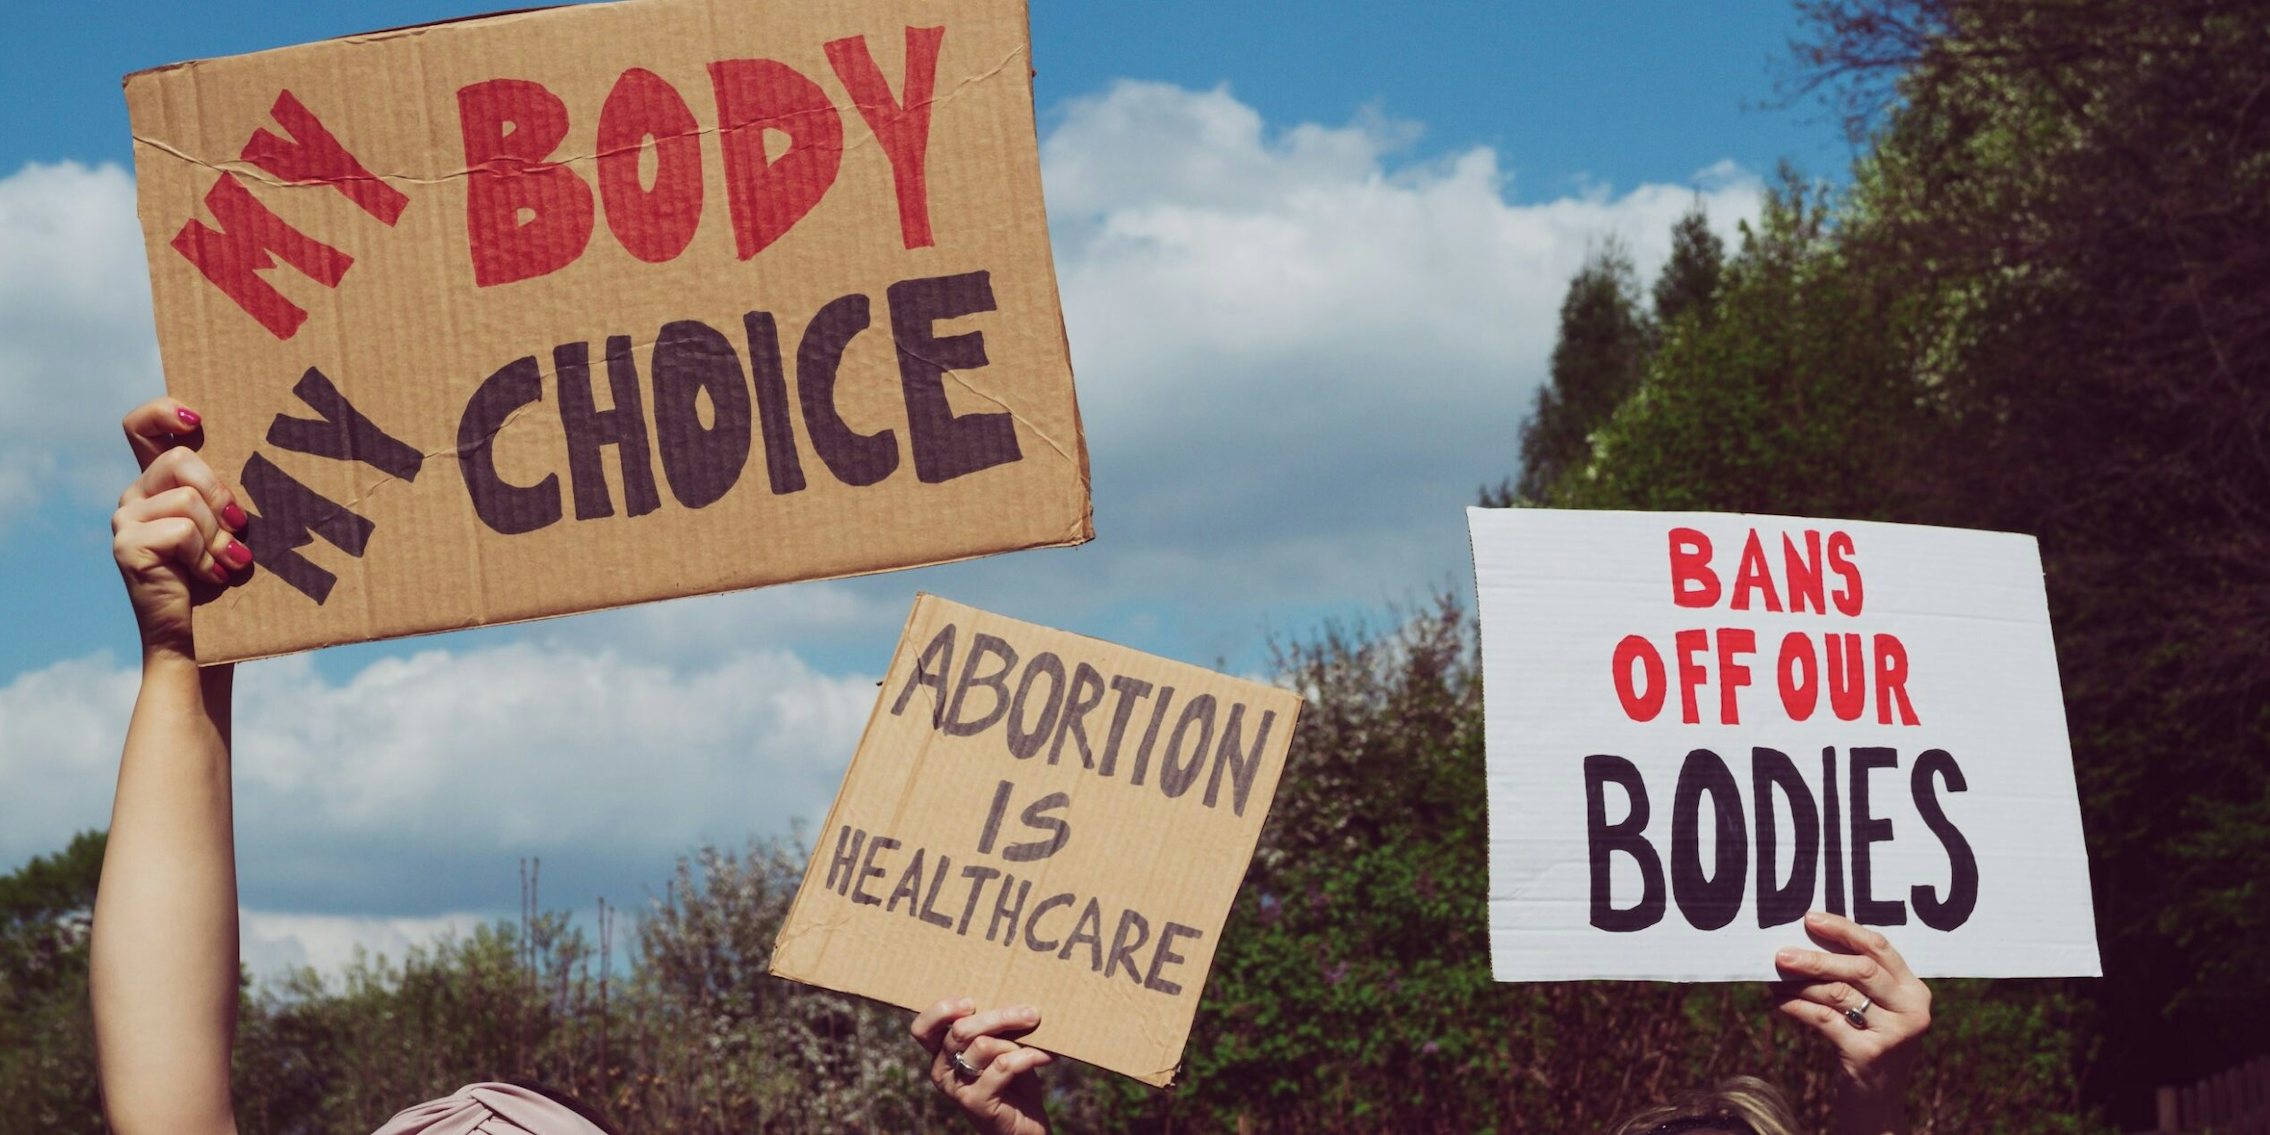 signs at abortion protest